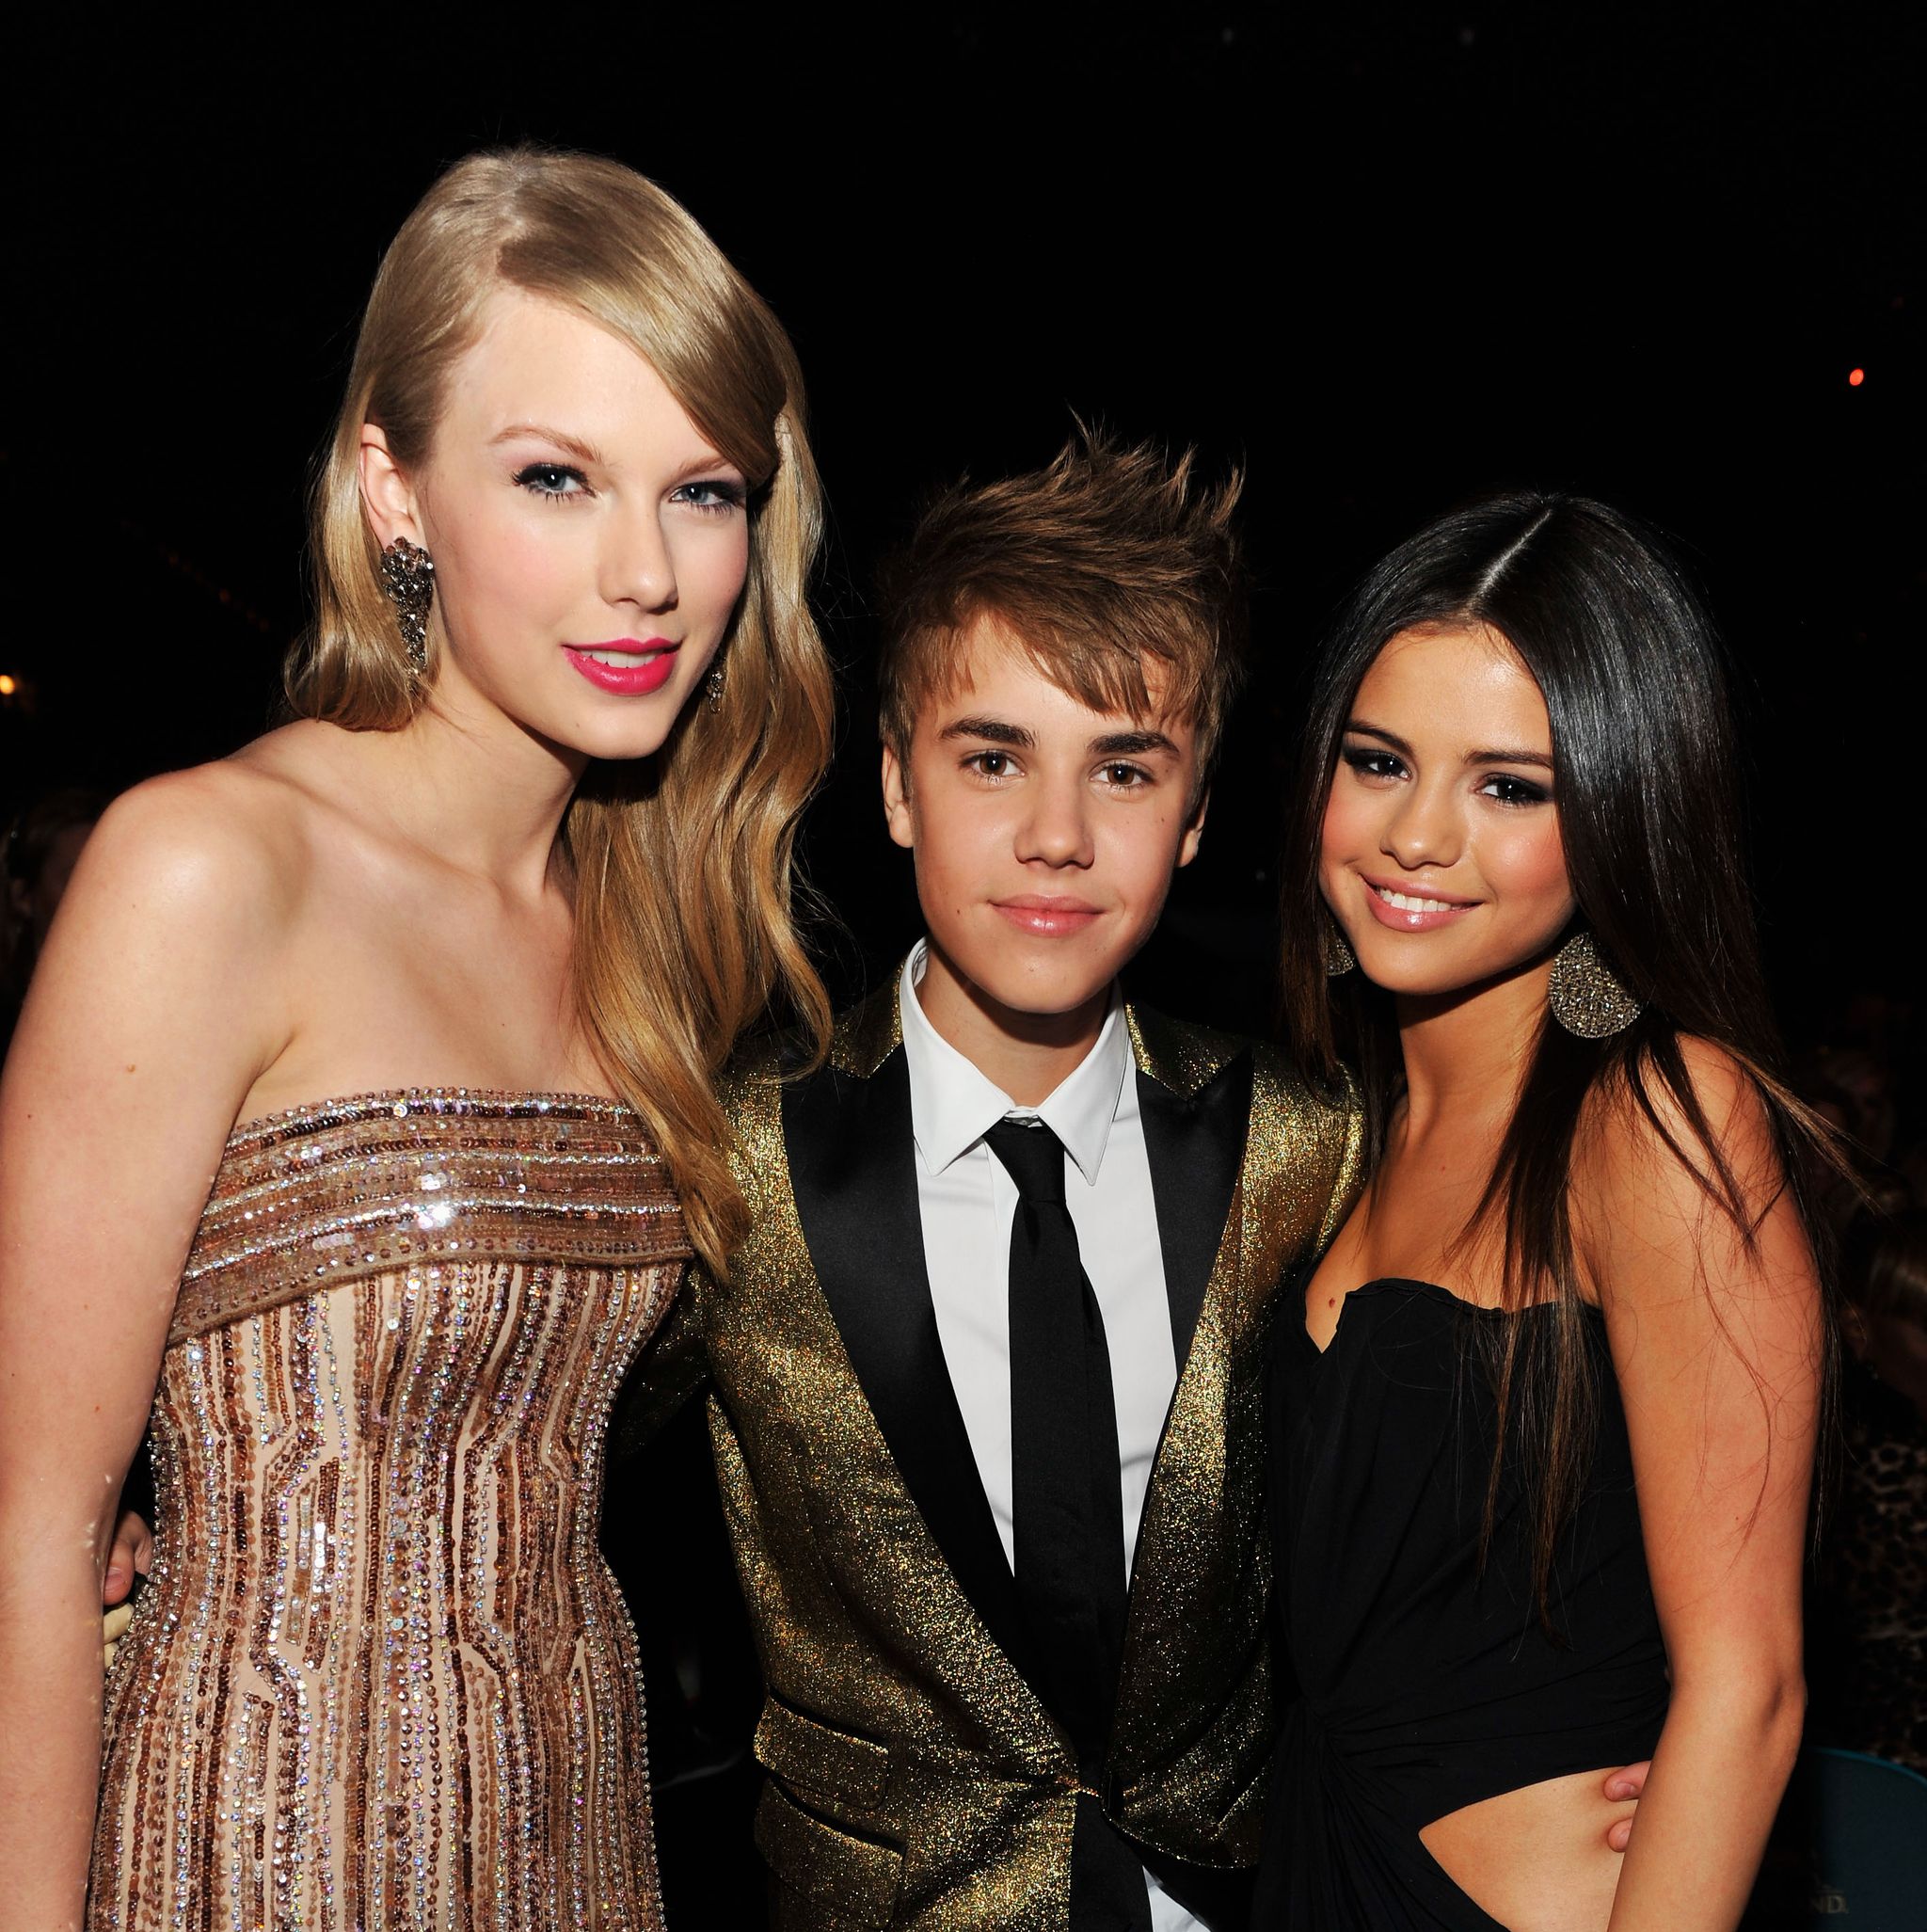 Taylor Swift Porn Naked - Taylor Swift Confirms Justin Bieber Cheated On Selena Gomez